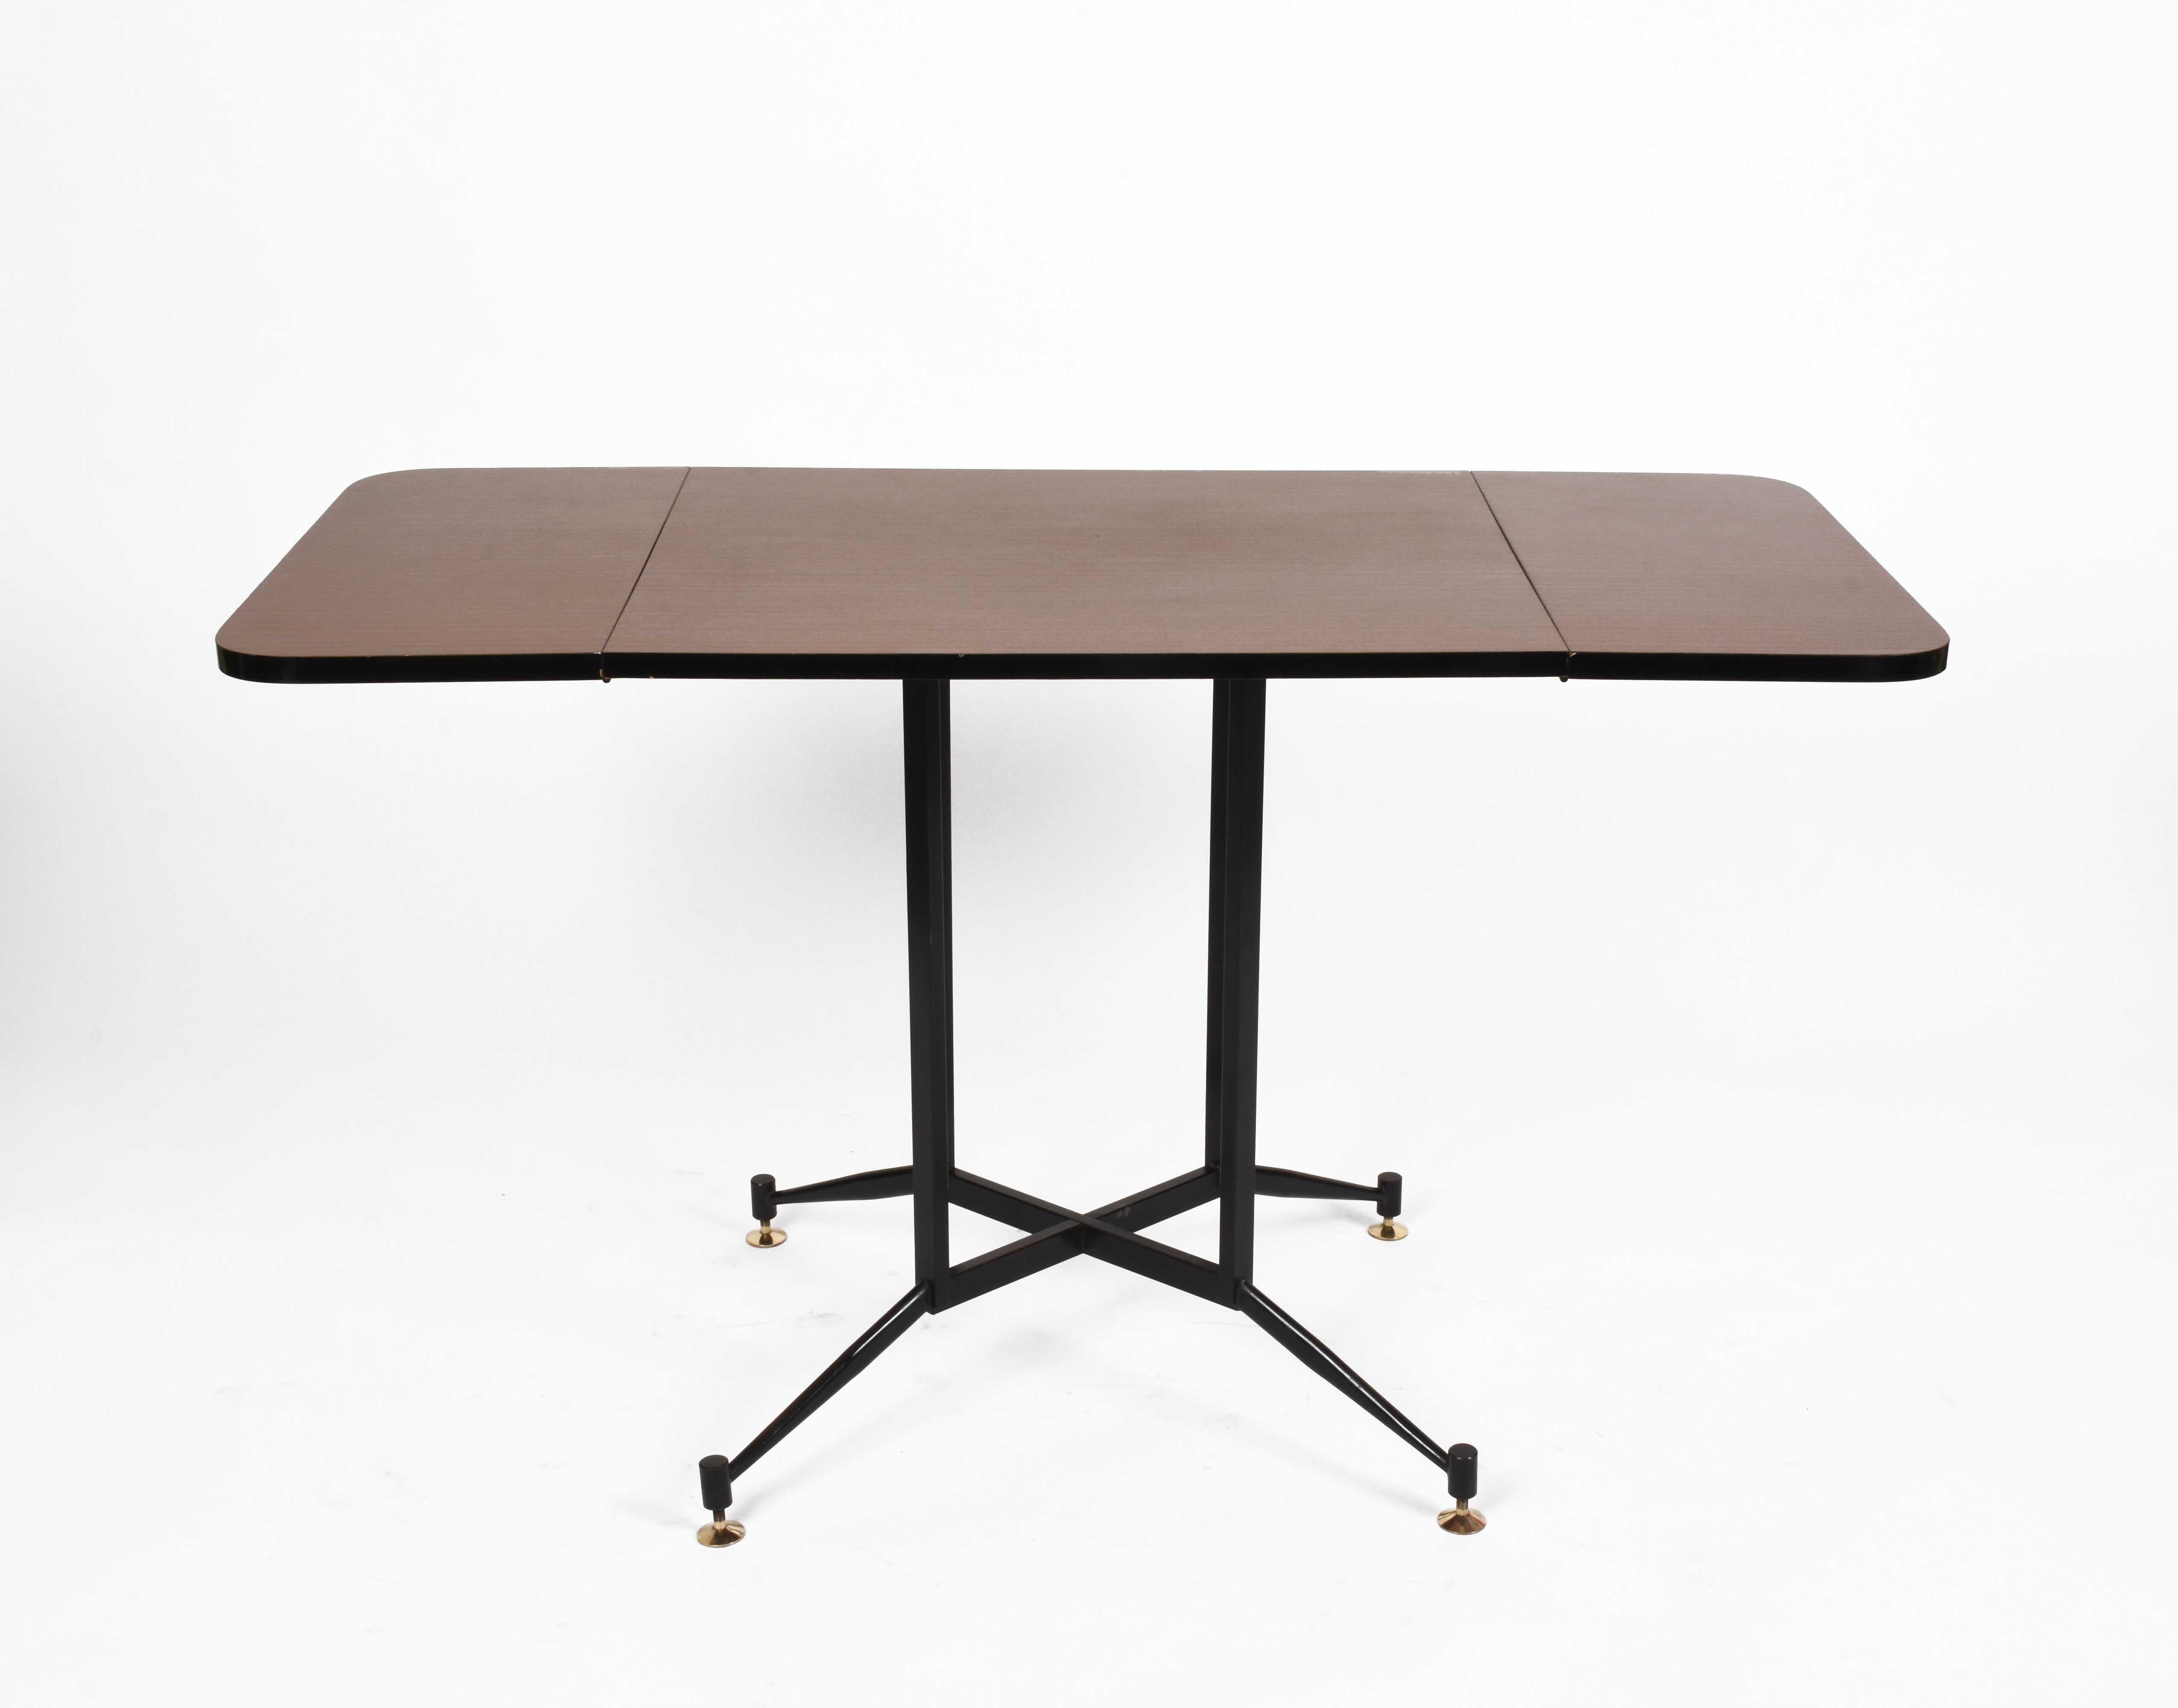 Mid-20th Century Gardella Midcentury Formica Steel and Brass Table, Laminati Plastici Italy 1950s For Sale